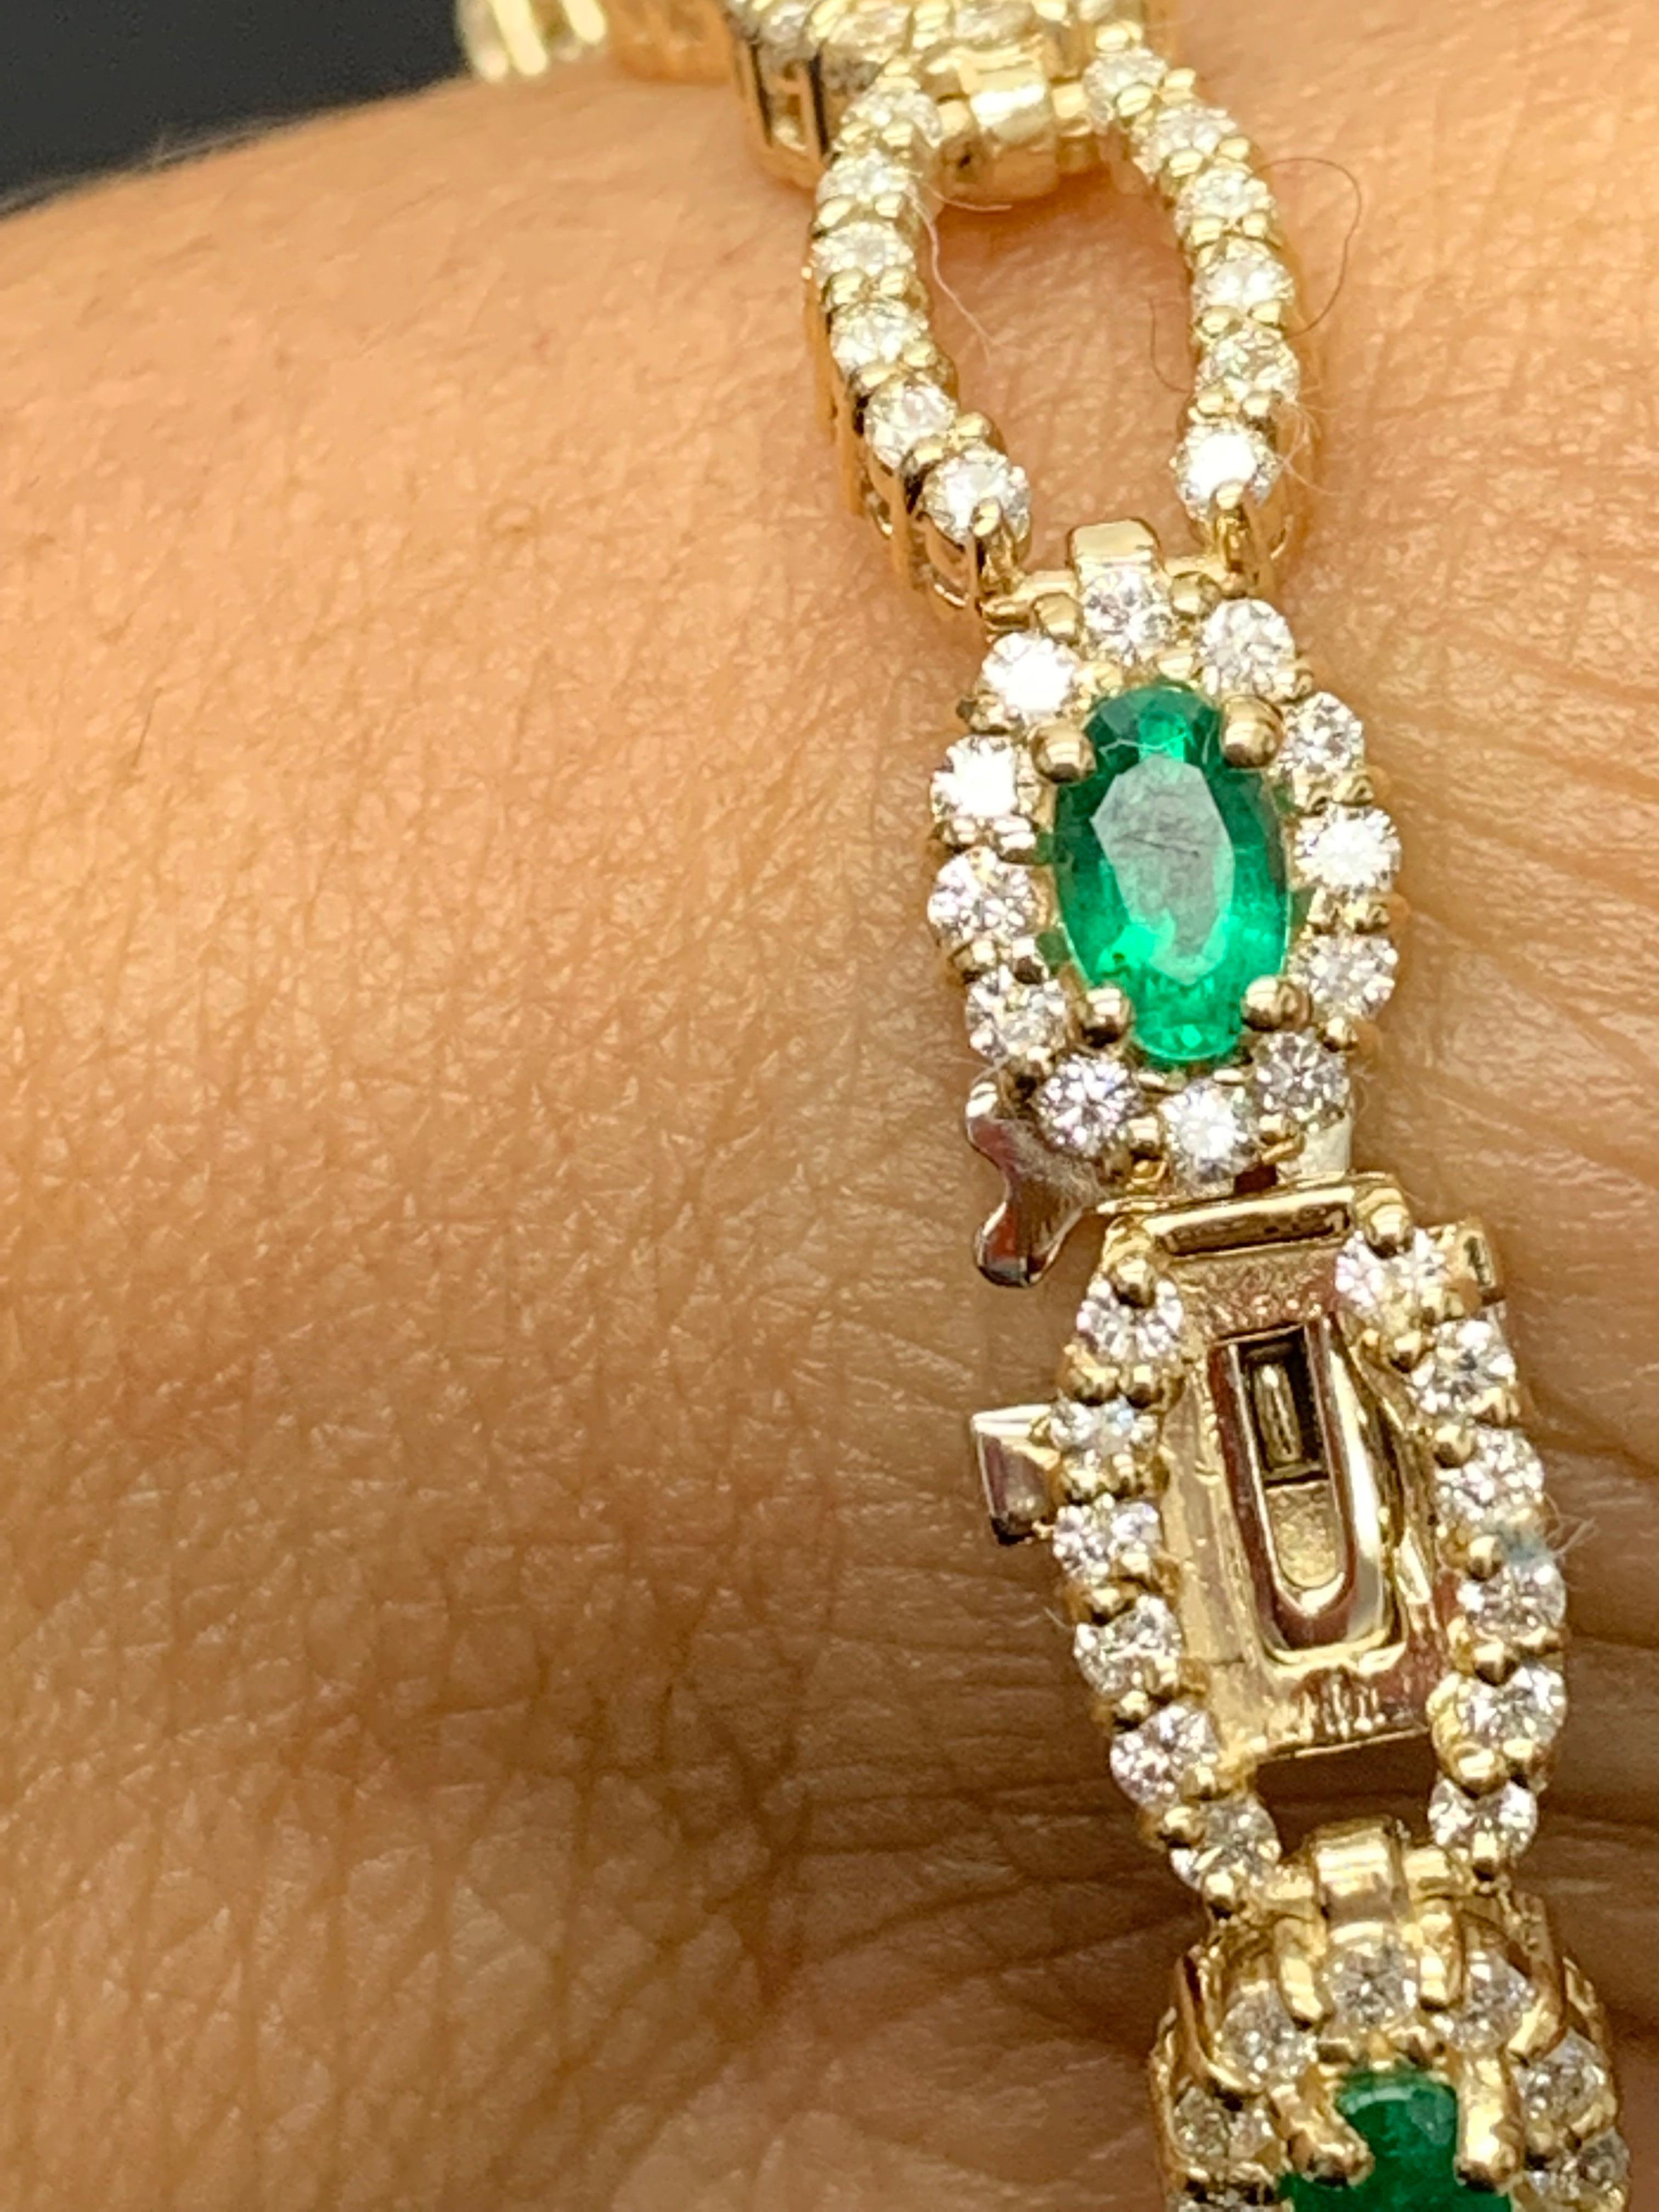 Open-Work 2.13 Carat Emerald and Diamond Bracelet in 14K Yellow Gold For Sale 4